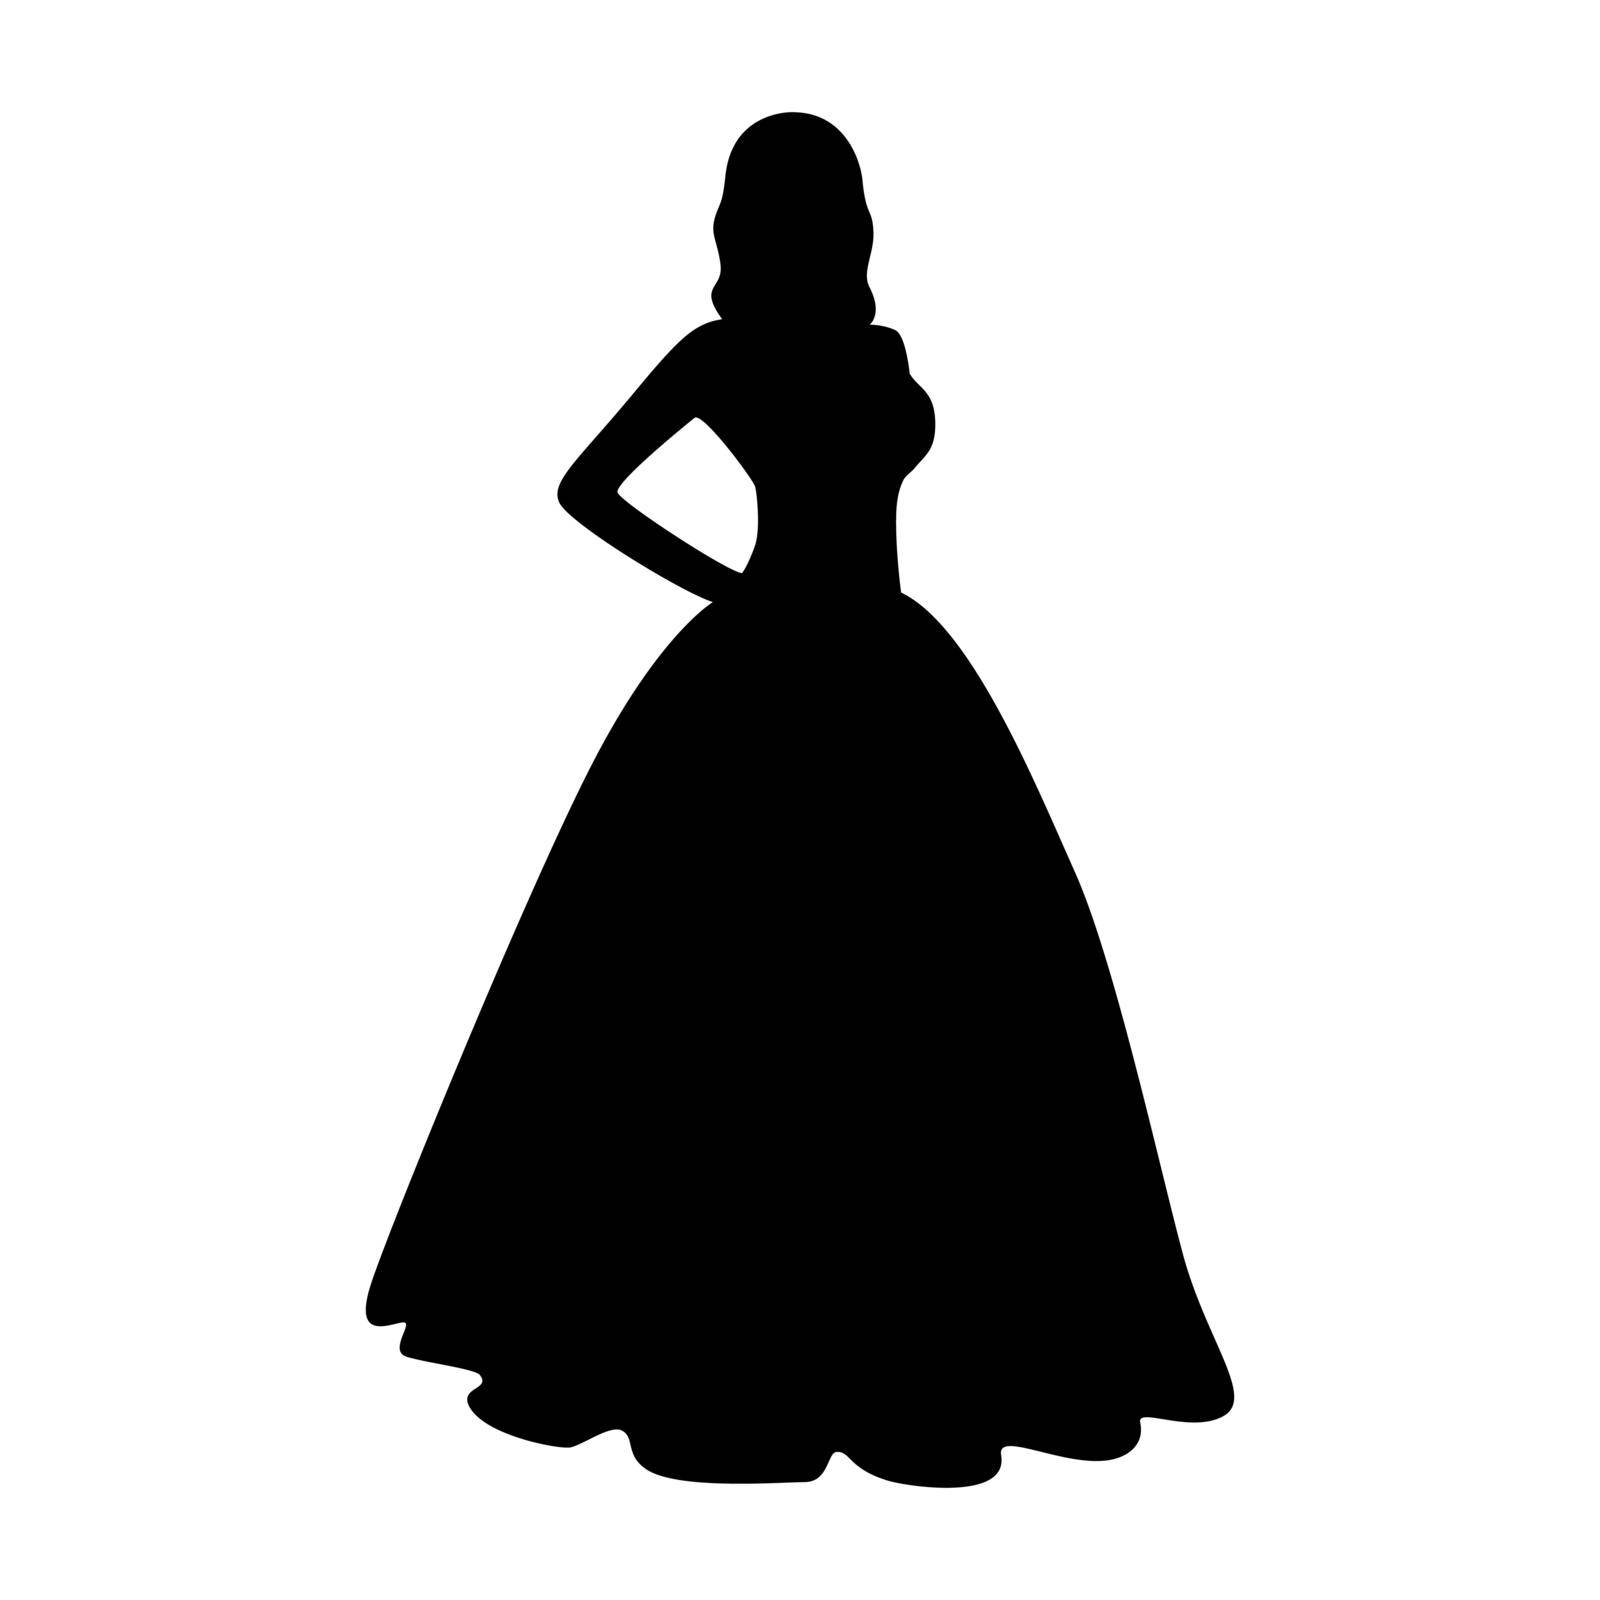 Bride in wedding puffy dress black isolated silhouette on white background by TassiaK